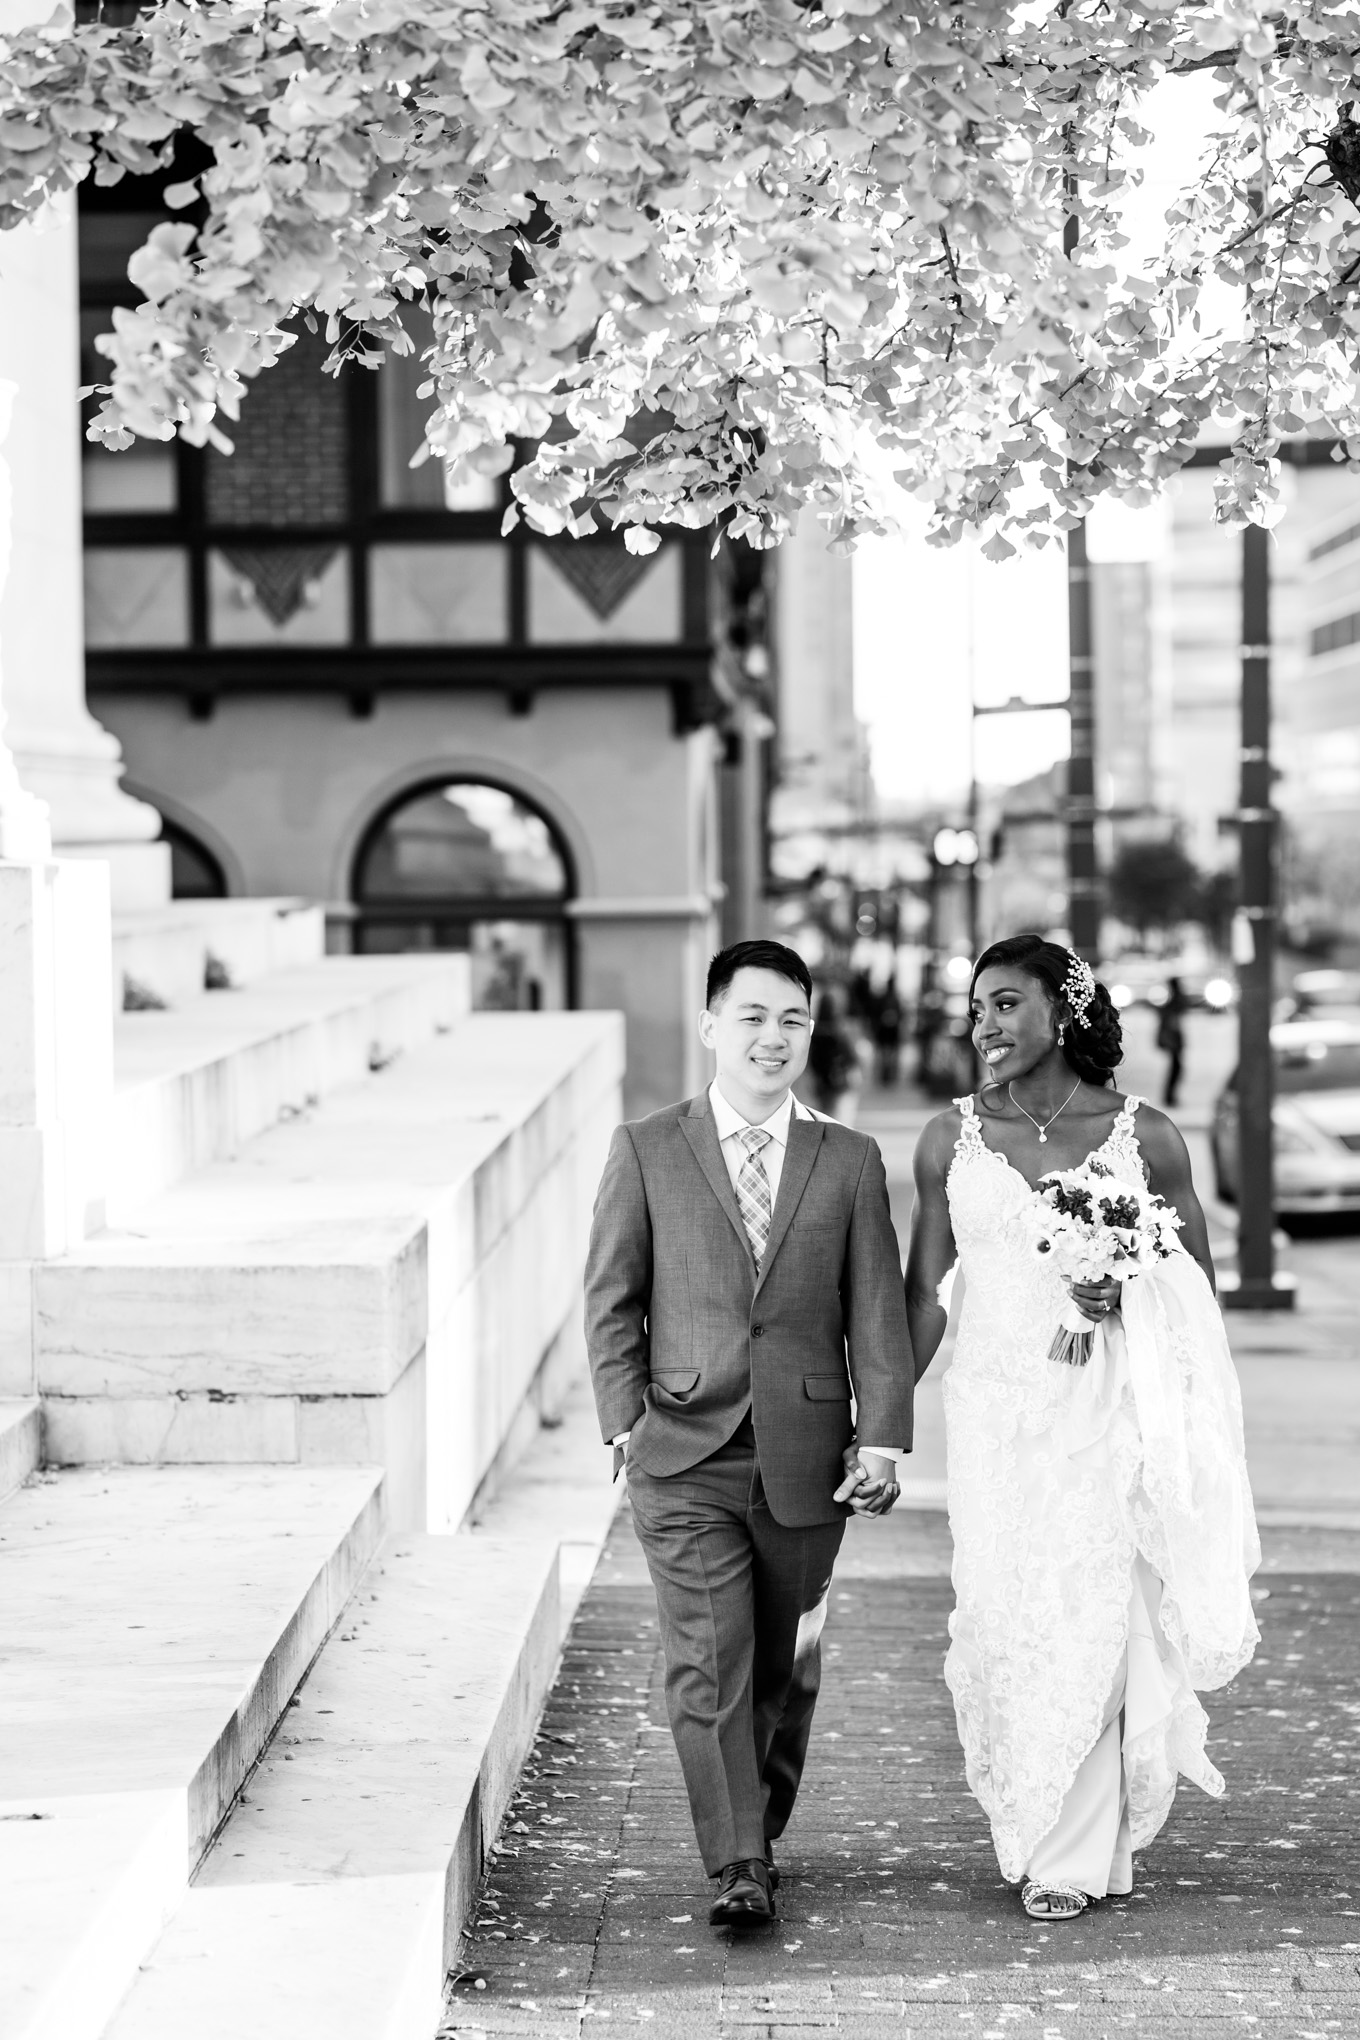 classic Baltimore wedding, Baltimore wedding, Hotel Monaco Baltimorre, Kimpton Hotel Monaco Baltimore, Kimpton Hotels, indoor wedding, flash photography, Maryland wedding, Maryland wedding photography, Maryland wedding photographer, Baltimore wedding photographer, DC wedding photographer, hotel wedding, classic wedding, Zales wedding rings, Essence of Australia, Dolled by Nueye, Talia Yvette, Sensational Flowers, black and white wedding photography, bride and groom portraits, natural light wedding portraits